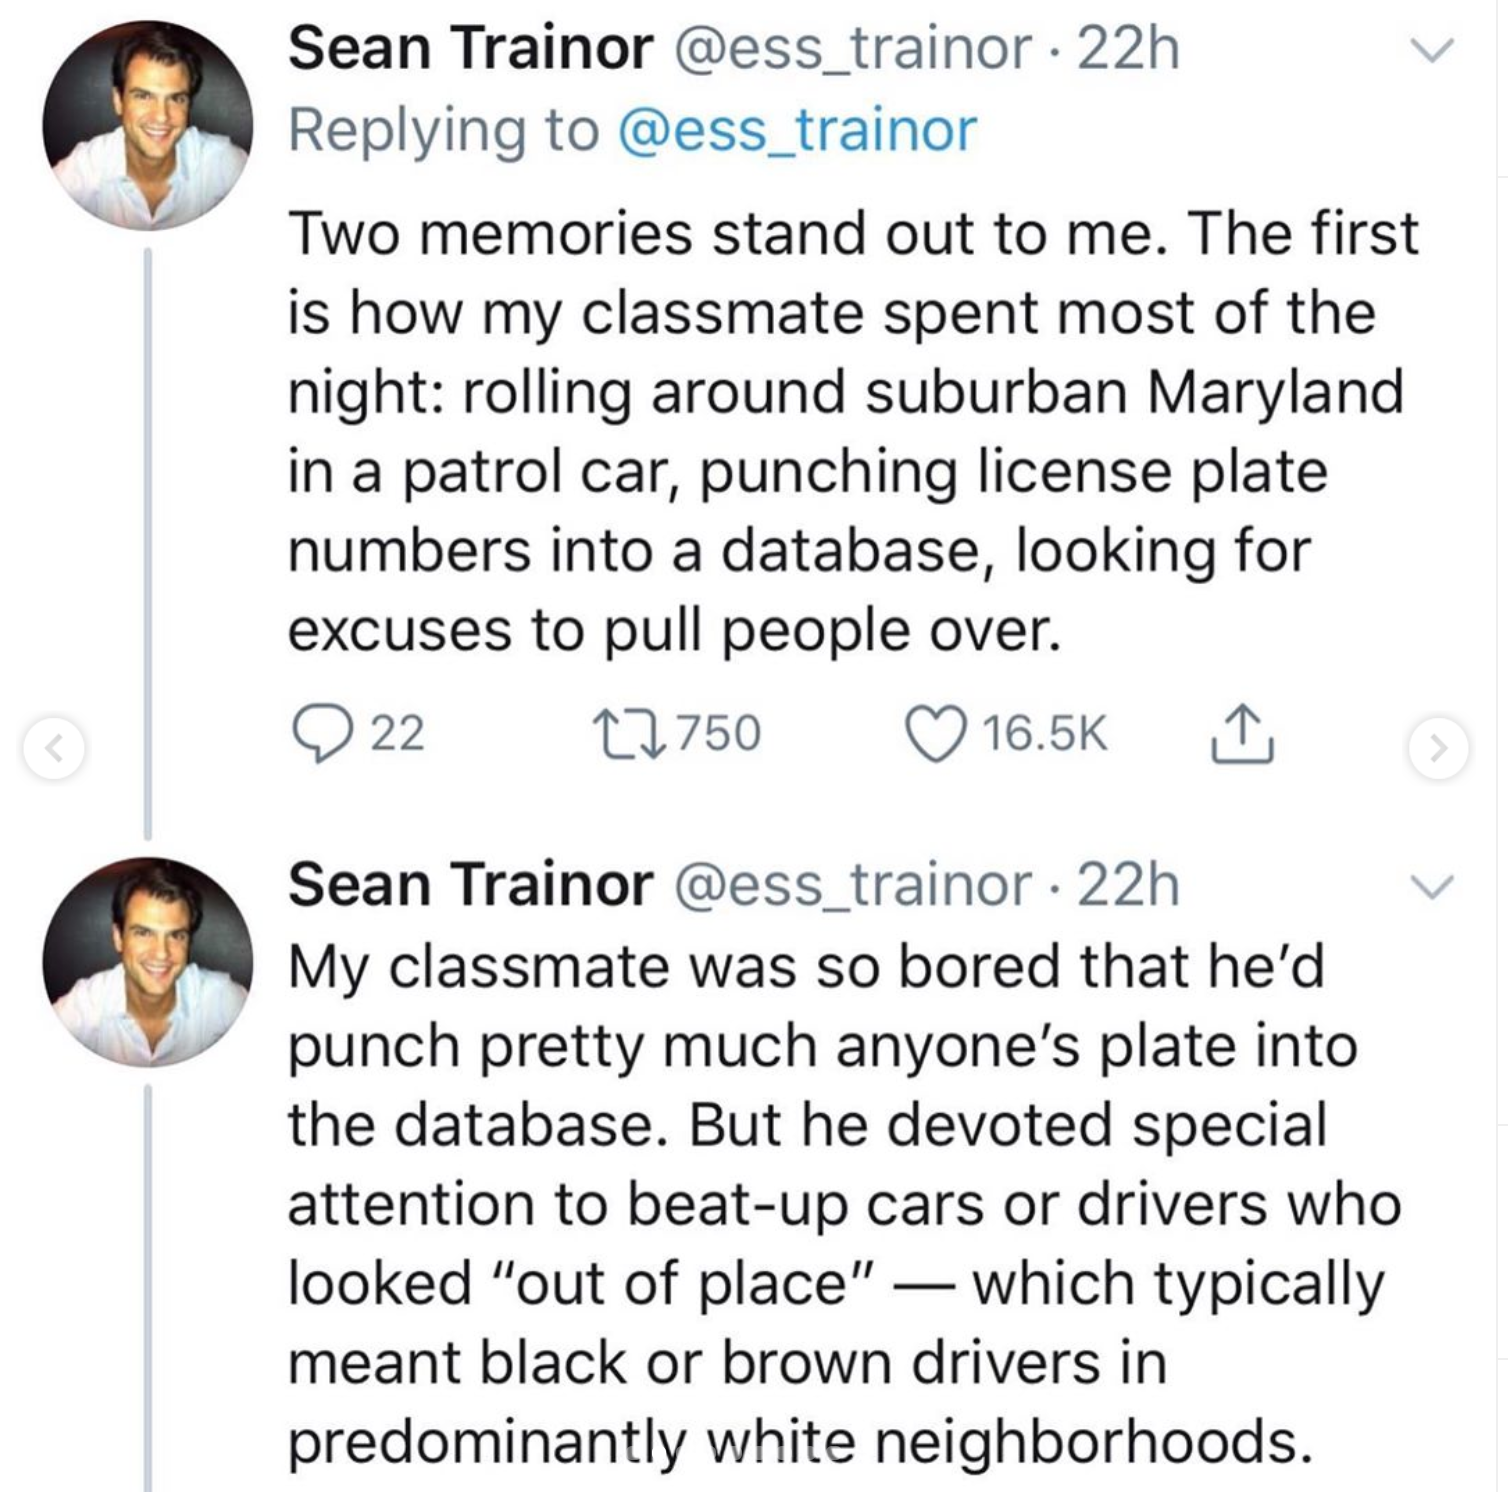 point - Sean Trainor 22h Two memories stand out to me. The first is how my classmate spent most of the night rolling around suburban Maryland in a patrol car, punching license plate numbers into a database, looking for excuses to pull people over. 22 1275